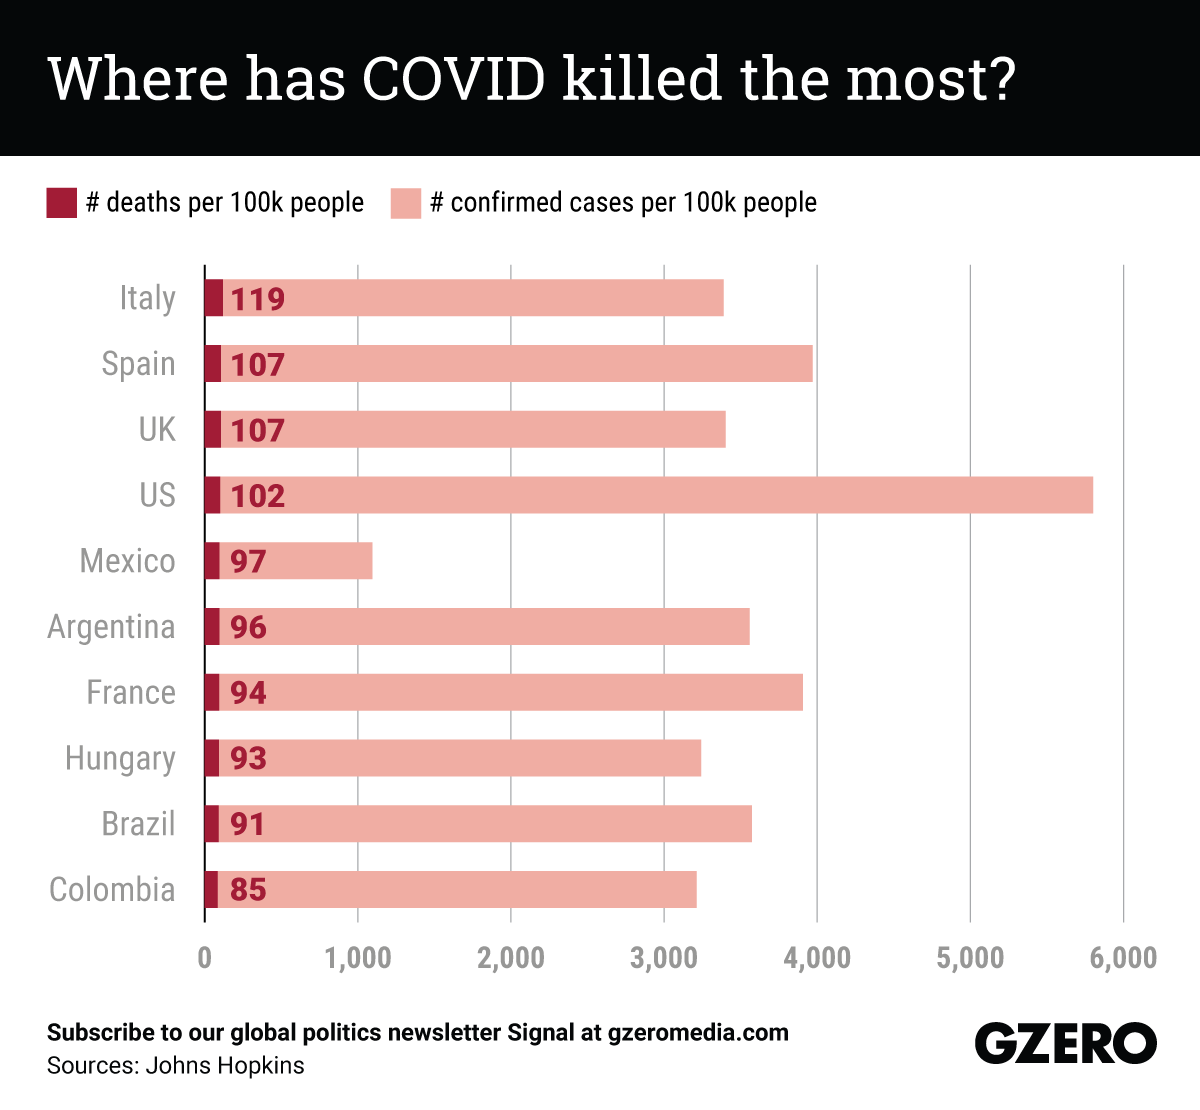 The Graphic Truth: Where has COVID killed the most?